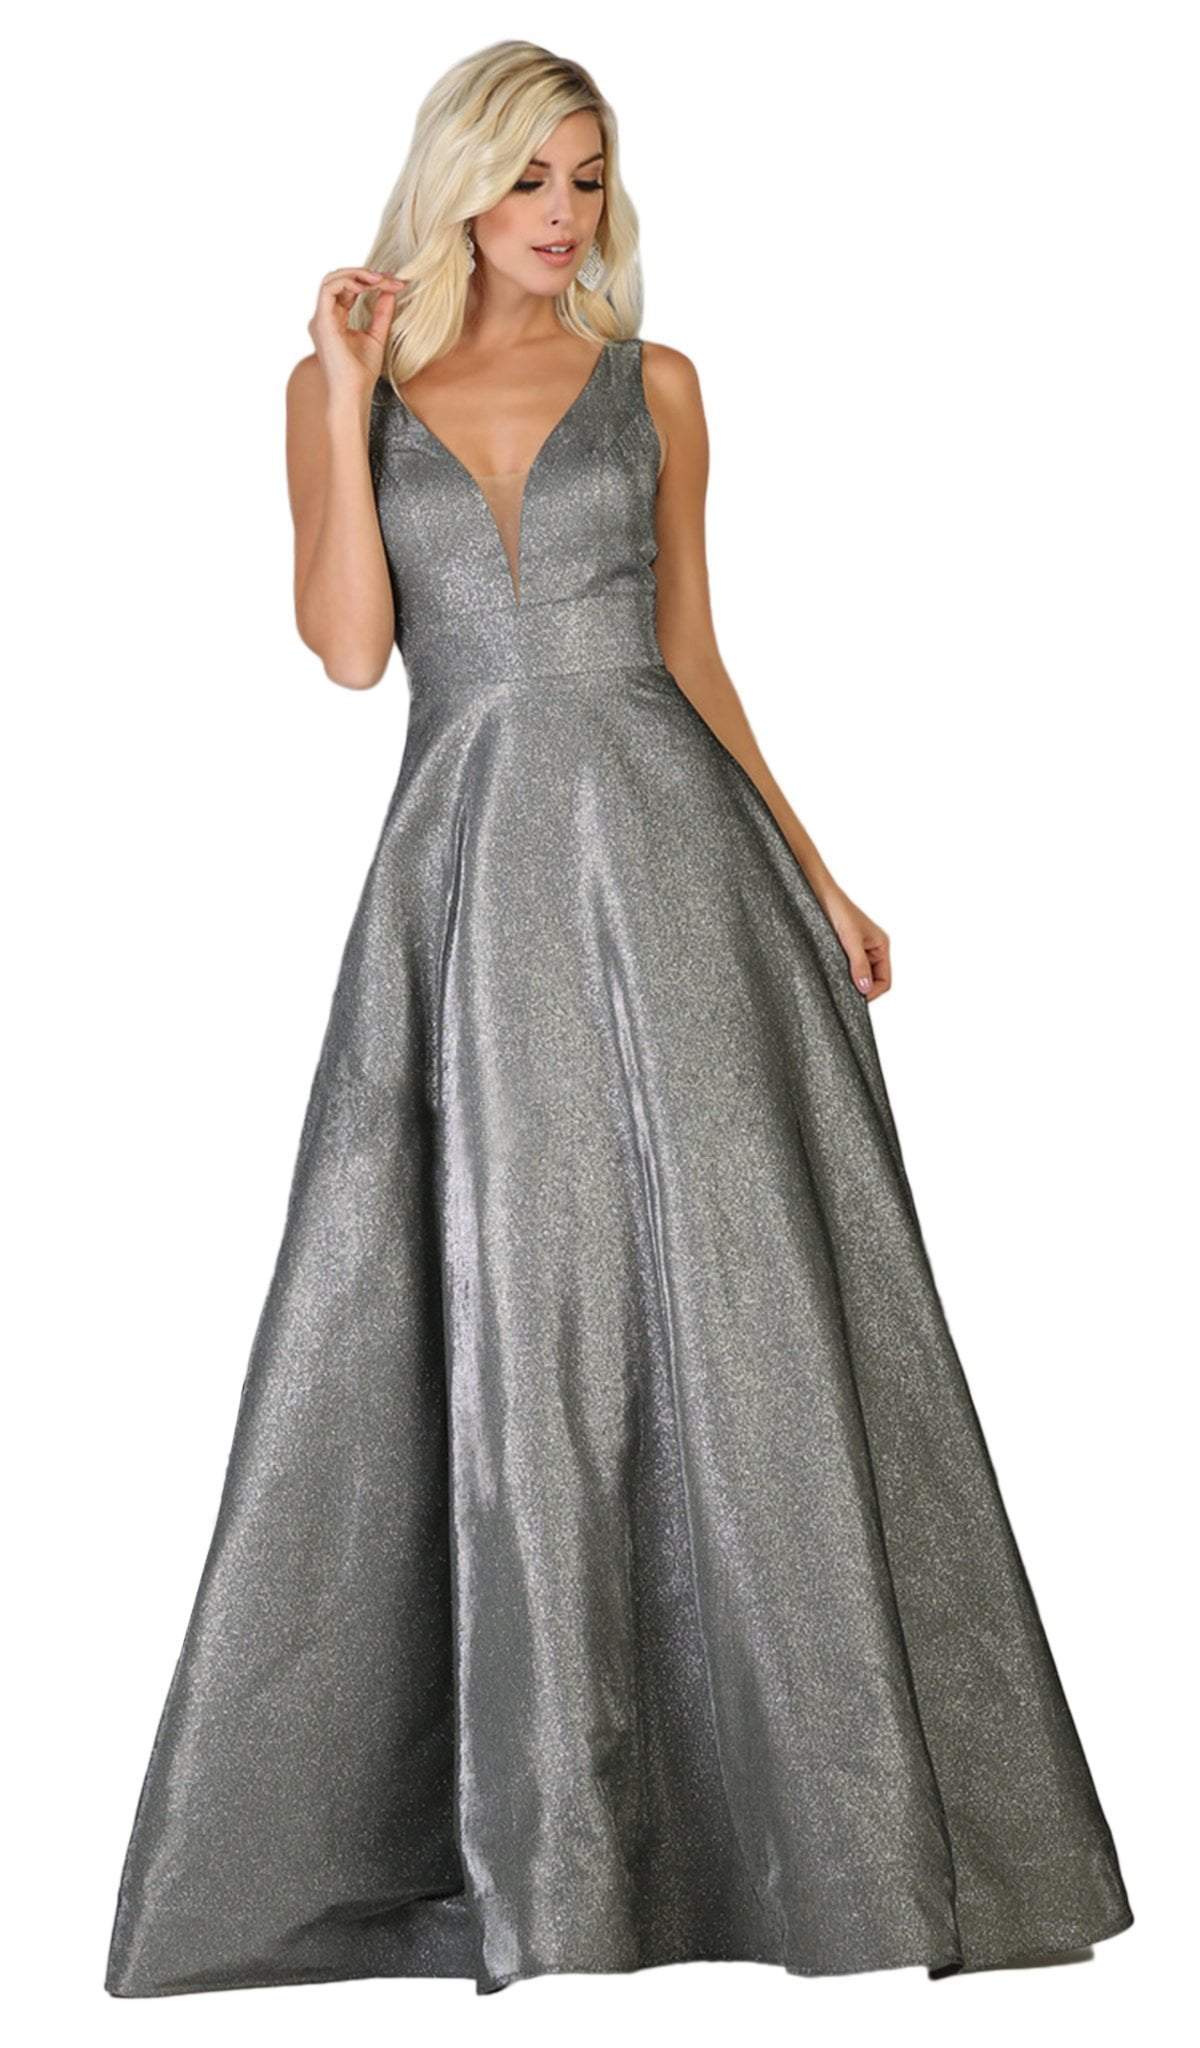 May Queen - RQ7755 Plunging V-Neck A-Line Evening Dress Evening Dresses 4 / Silver